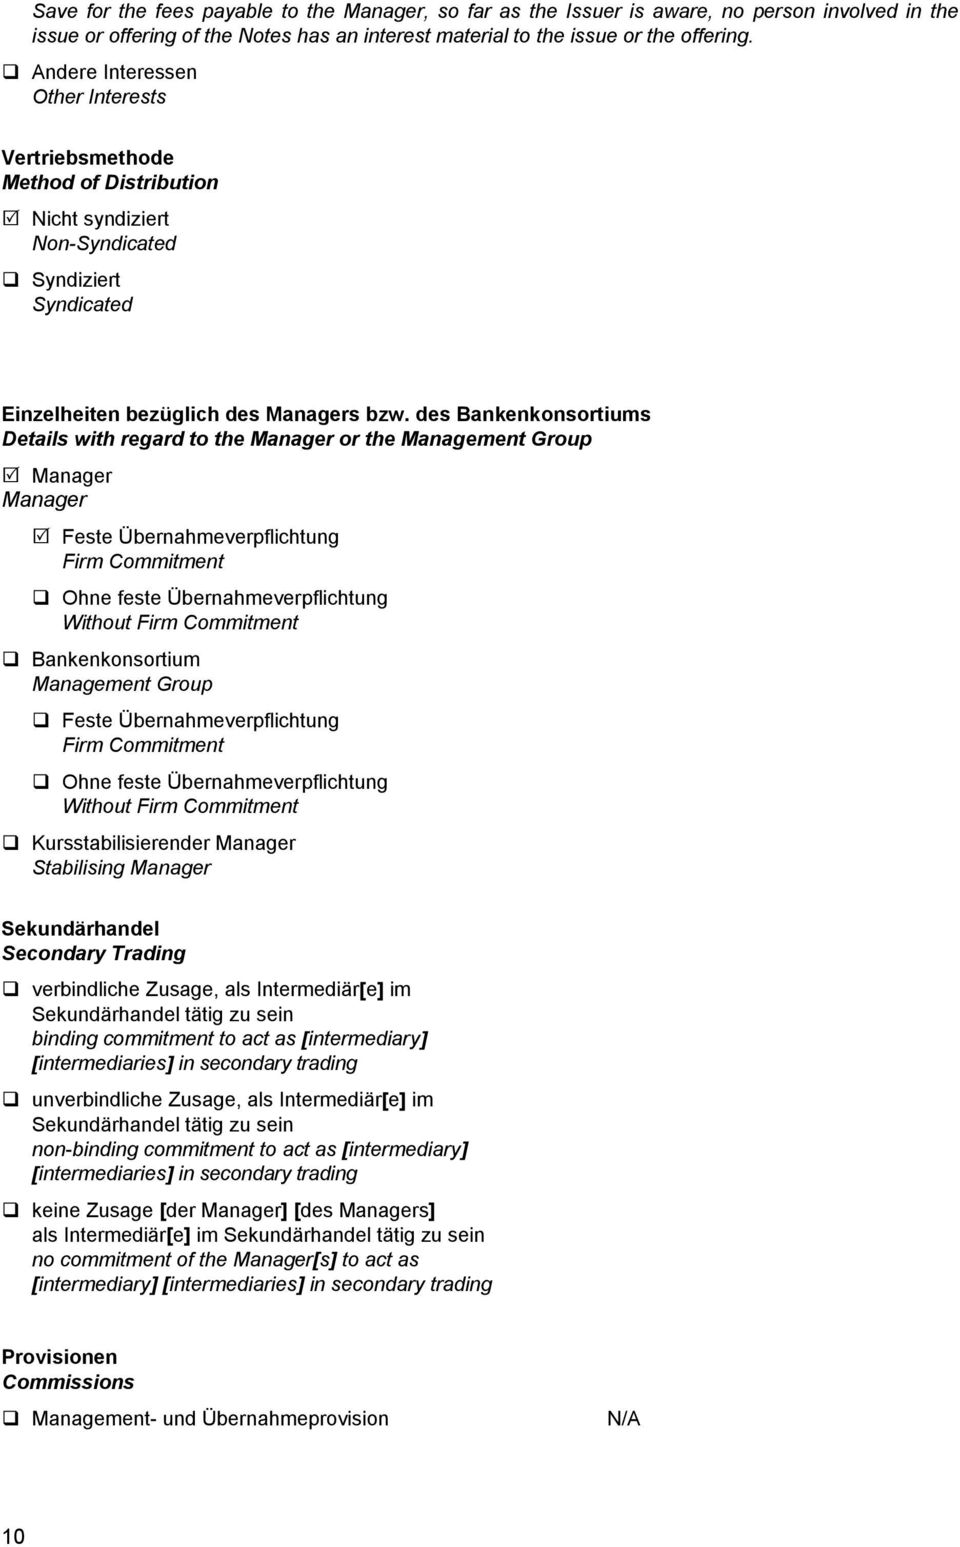 des Bankenkonsortiums Details with regard to the Manager or the Management Group Manager Manager Feste Übernahmeverpflichtung Firm Commitment Ohne feste Übernahmeverpflichtung Without Firm Commitment